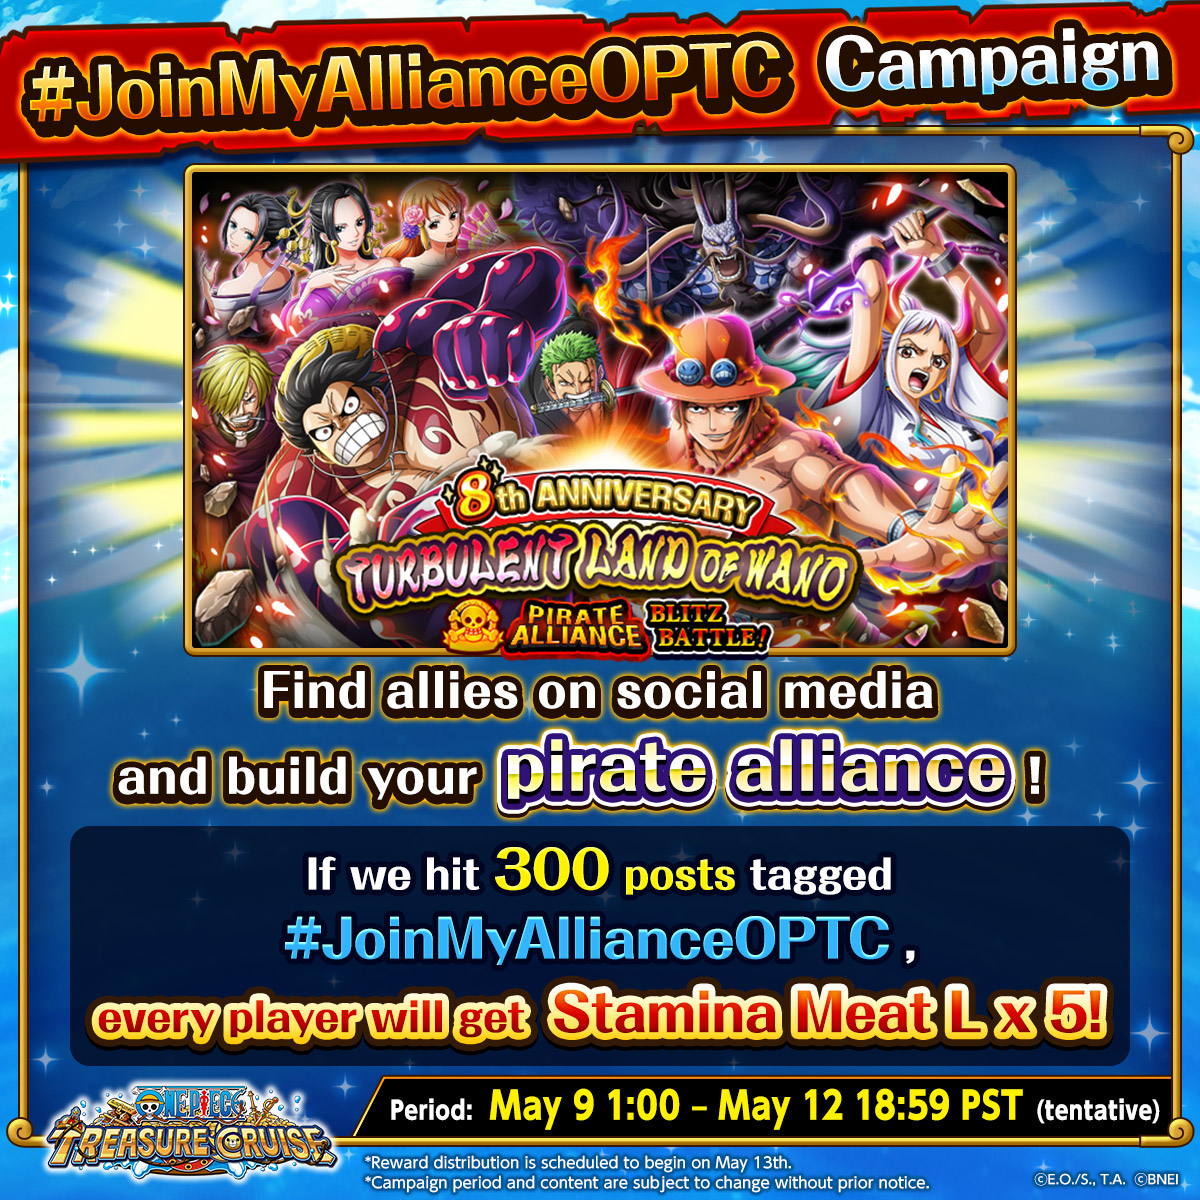 Nakama, Join in and find players for your Pirate Alliance! Create a post with the tag #JoinMyAllianceOPTC When we reach 300 posts with the hashtag, all players will receive Stamina Meat L x5! Period: 5/9 1:00 - 5/12 18:59 PST #OPTC